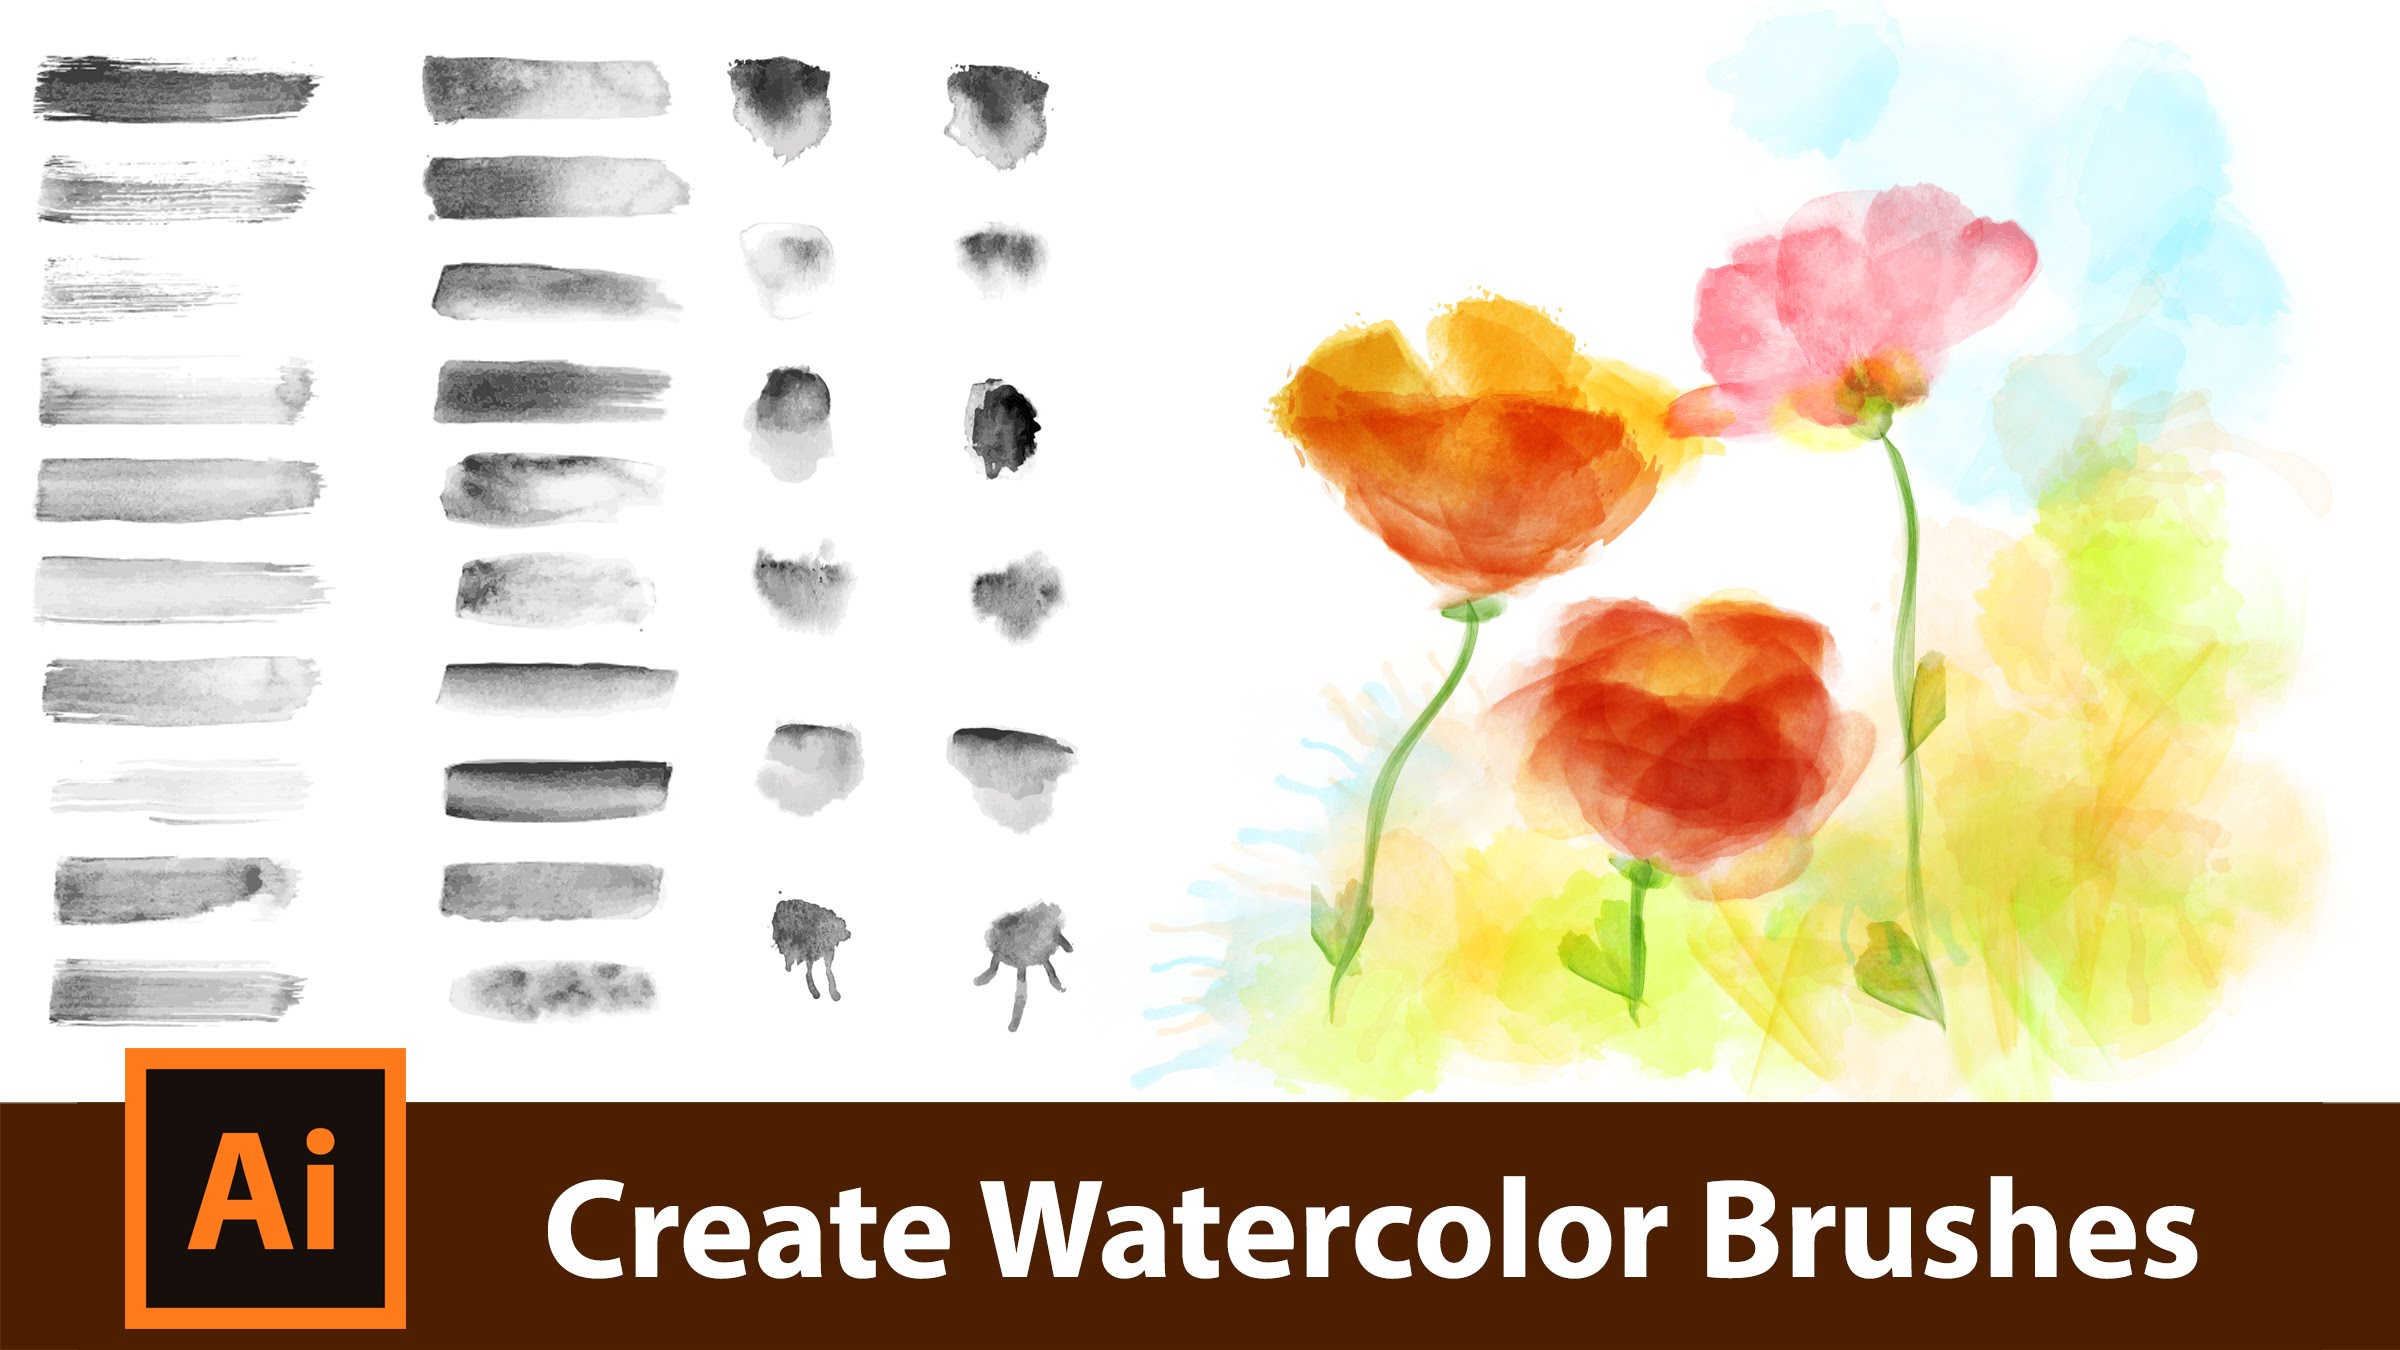 watercolor brushes for illustrator free download